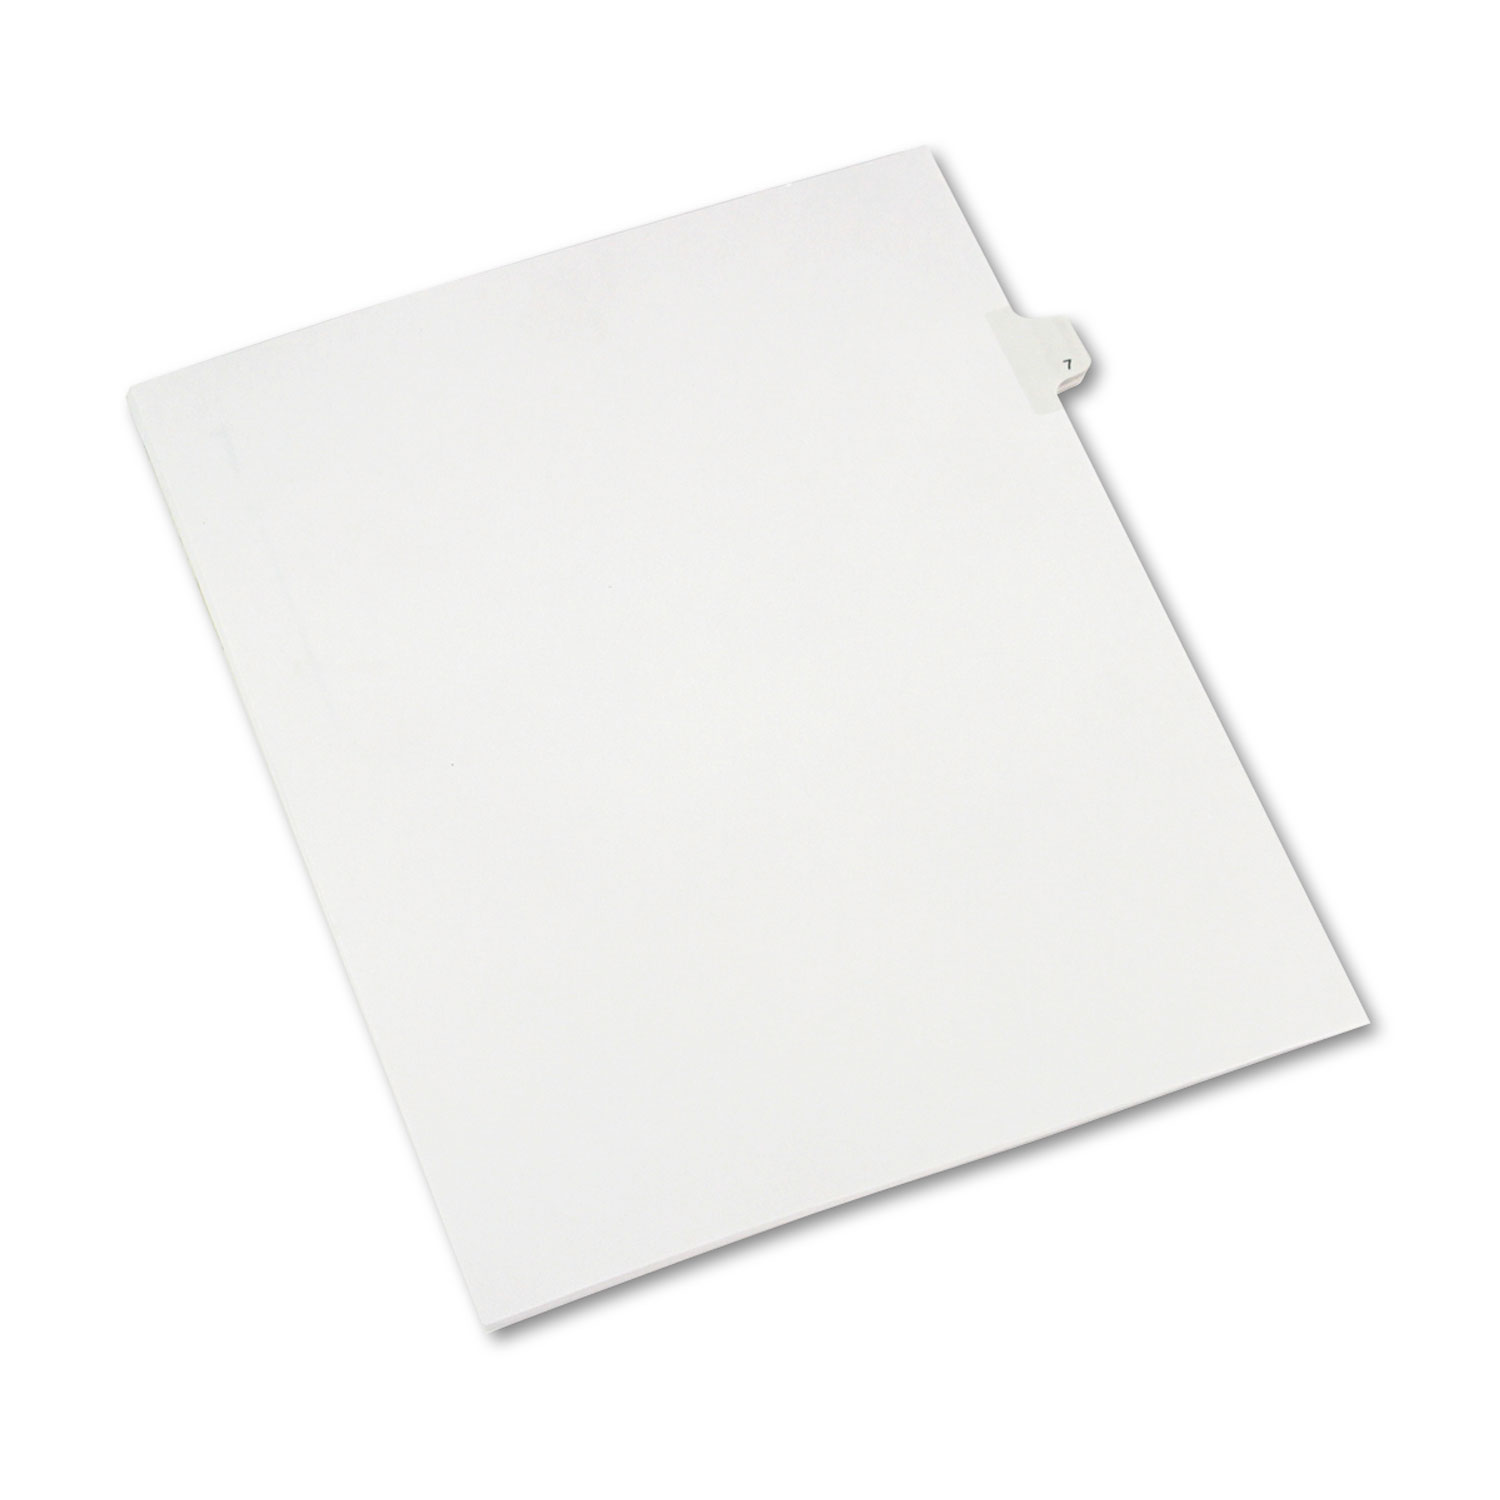  Avery 82205 Preprinted Legal Exhibit Side Tab Index Dividers, Allstate Style, 10-Tab, 7, 11 x 8.5, White, 25/Pack (AVE82205) 